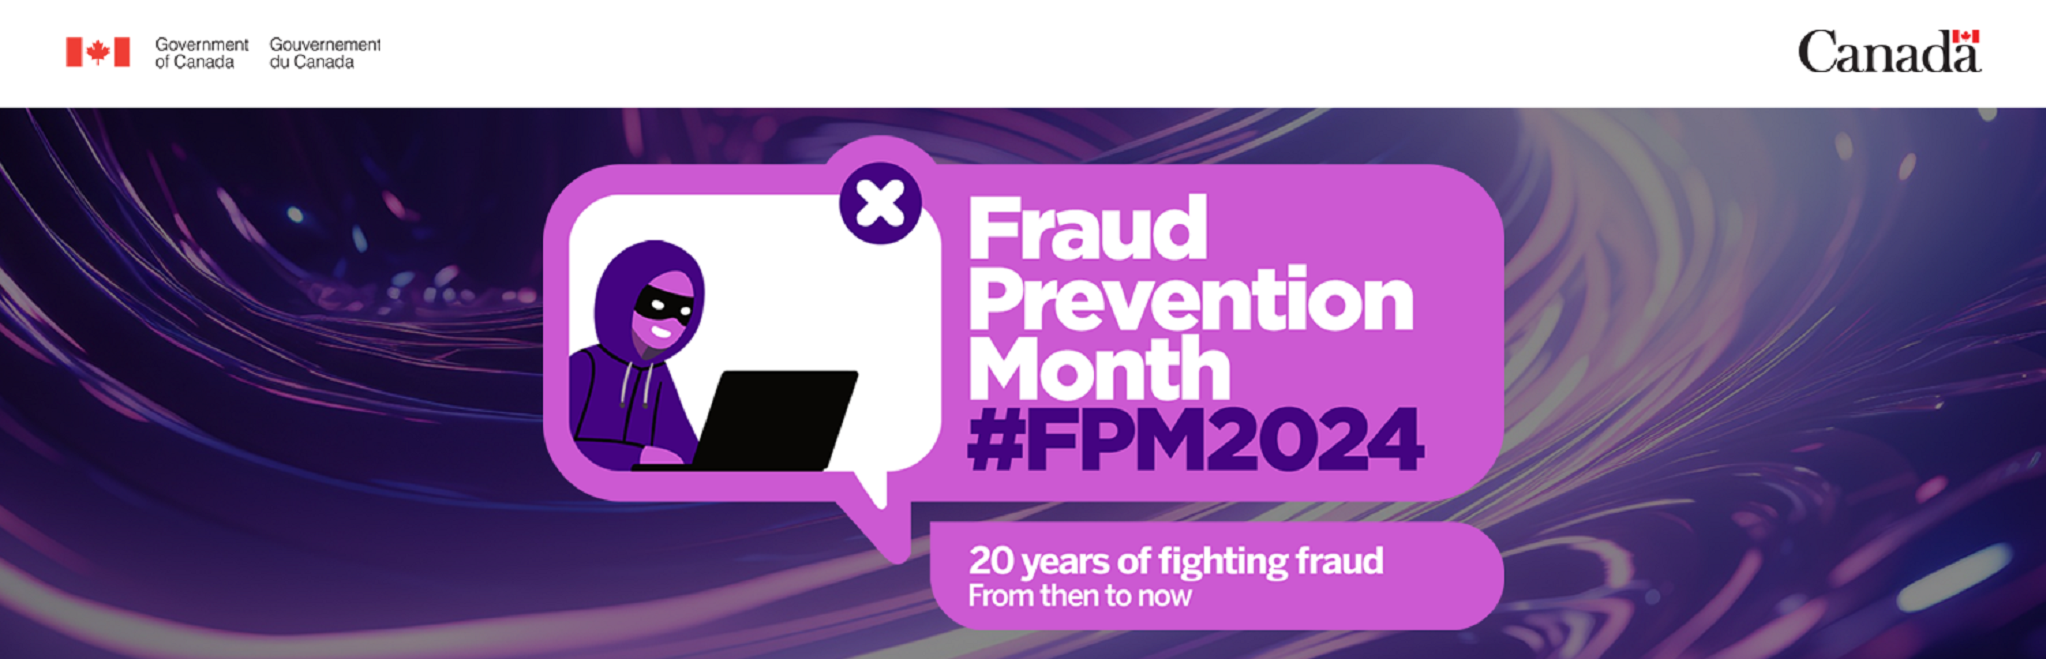 fraud prevention month 2024 theme 20 years of fighting fraud from then to now